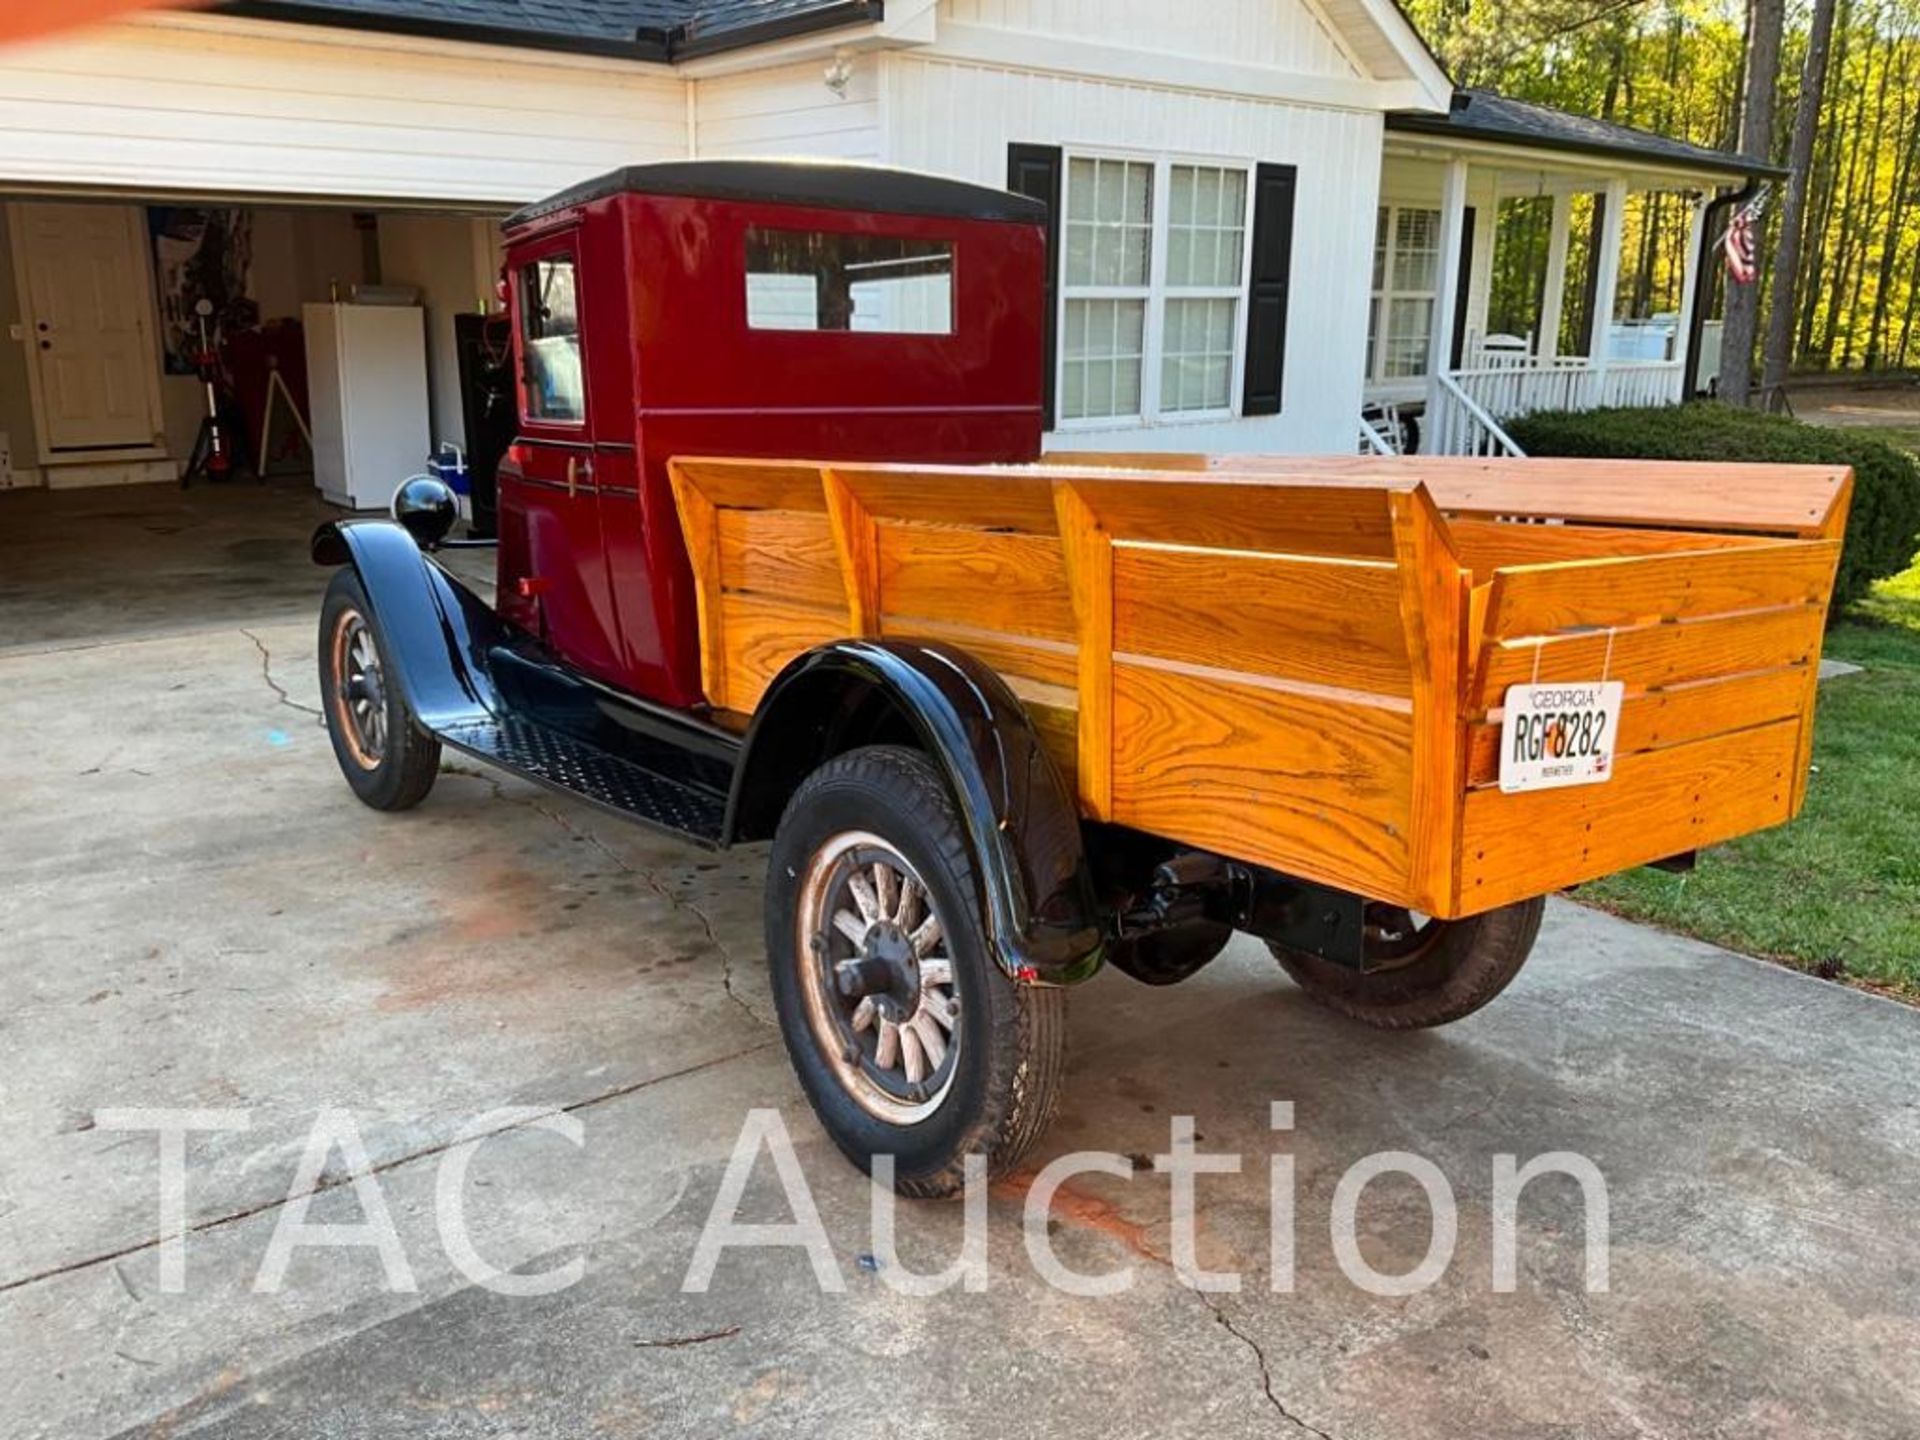 1928 Chevrolet Stake Body Bed Pick Up Truck - Image 3 of 44